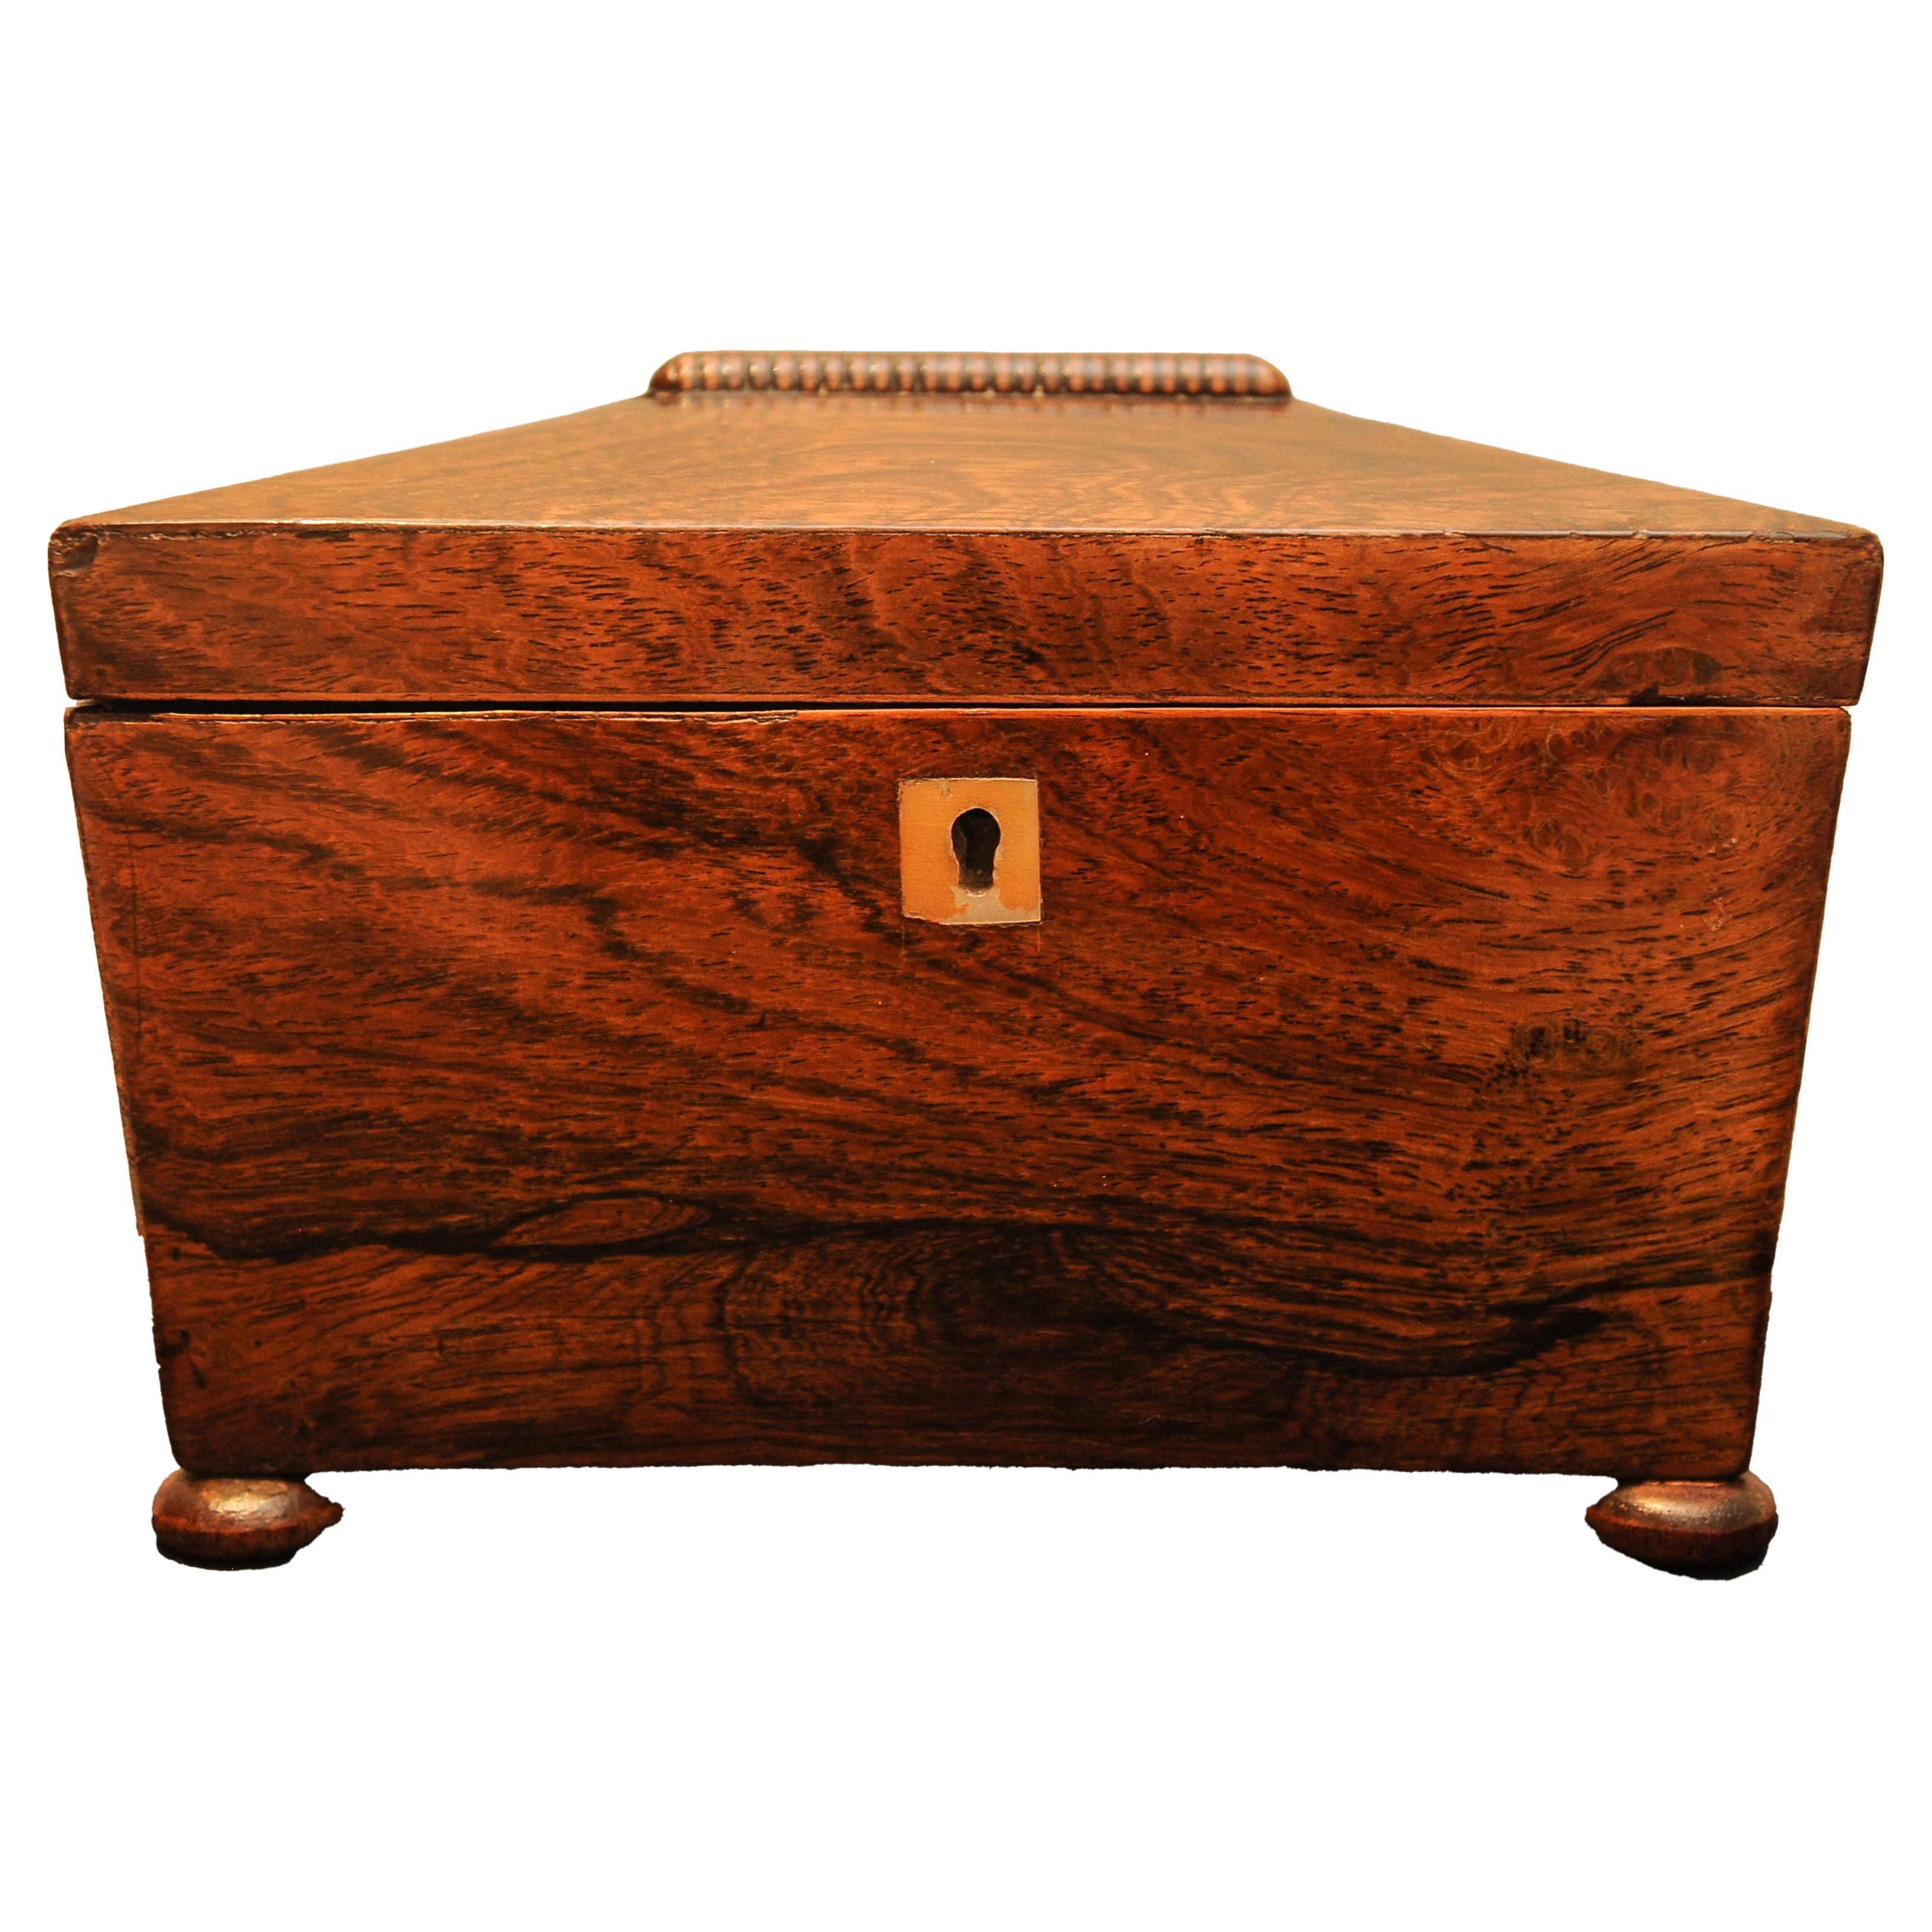 A Sarcophagus Shaped Regency Rosewood Tea Caddy With Separate Tea Compartments